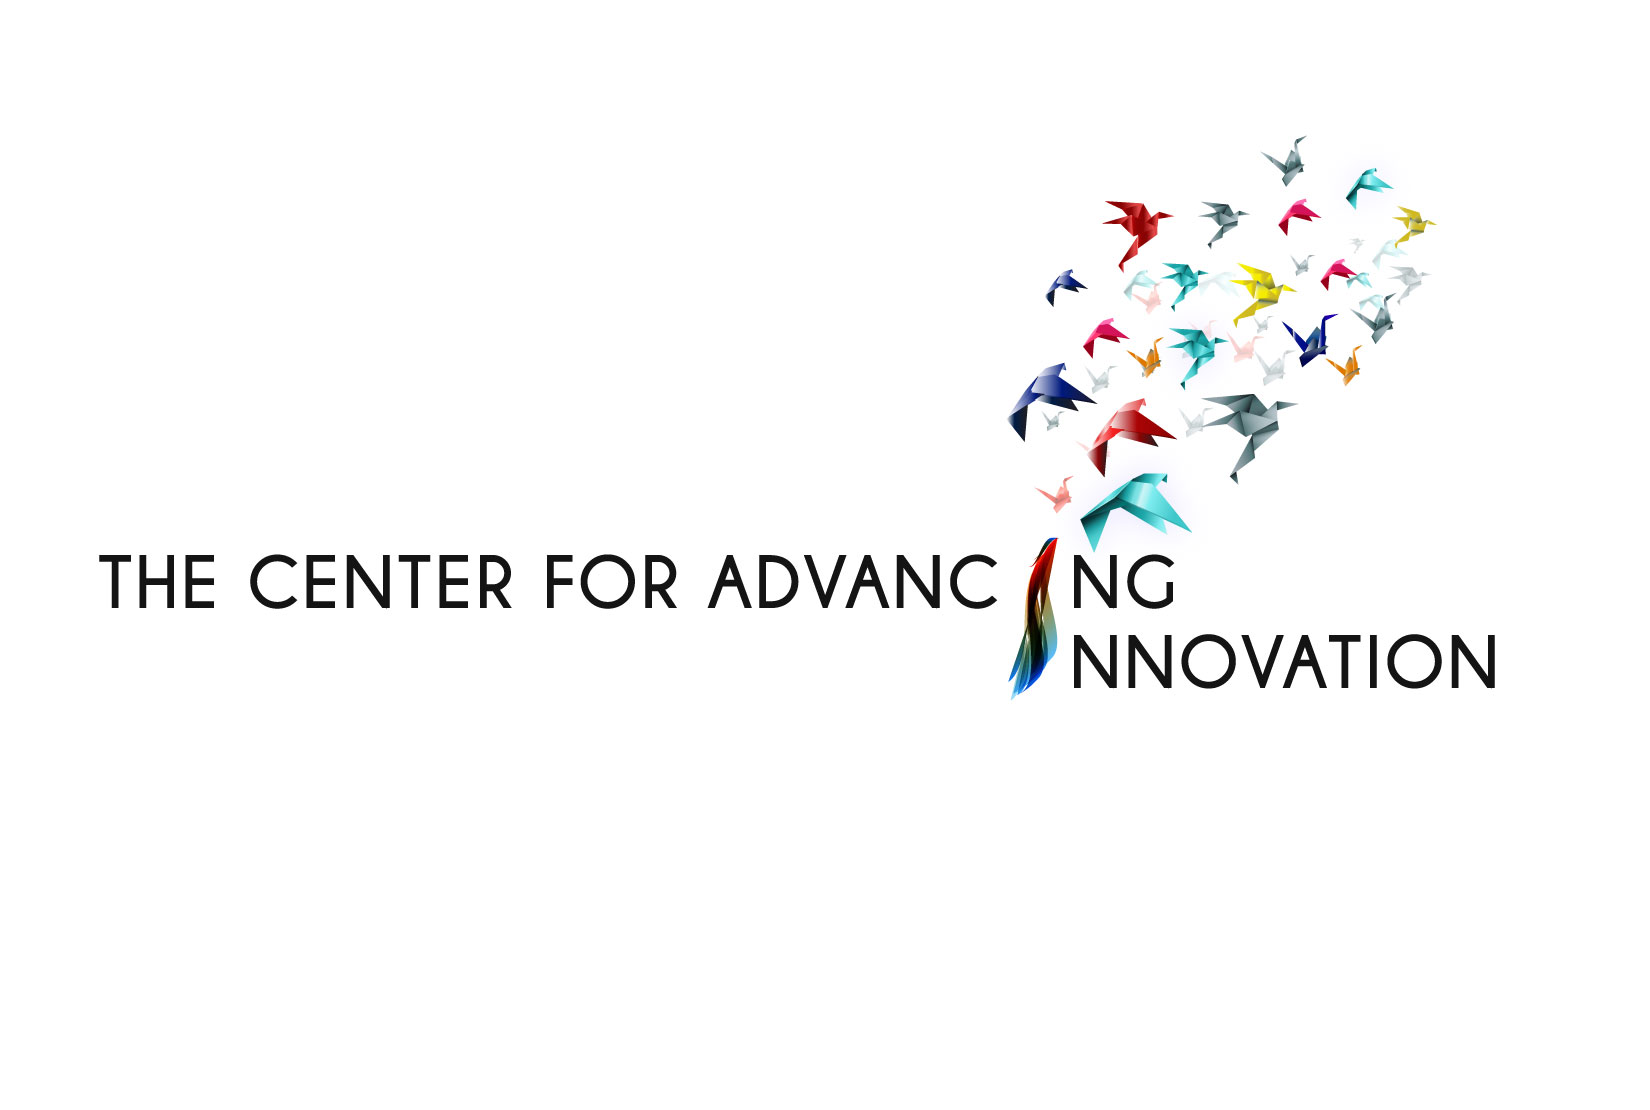 The Center for Advancing Innovation